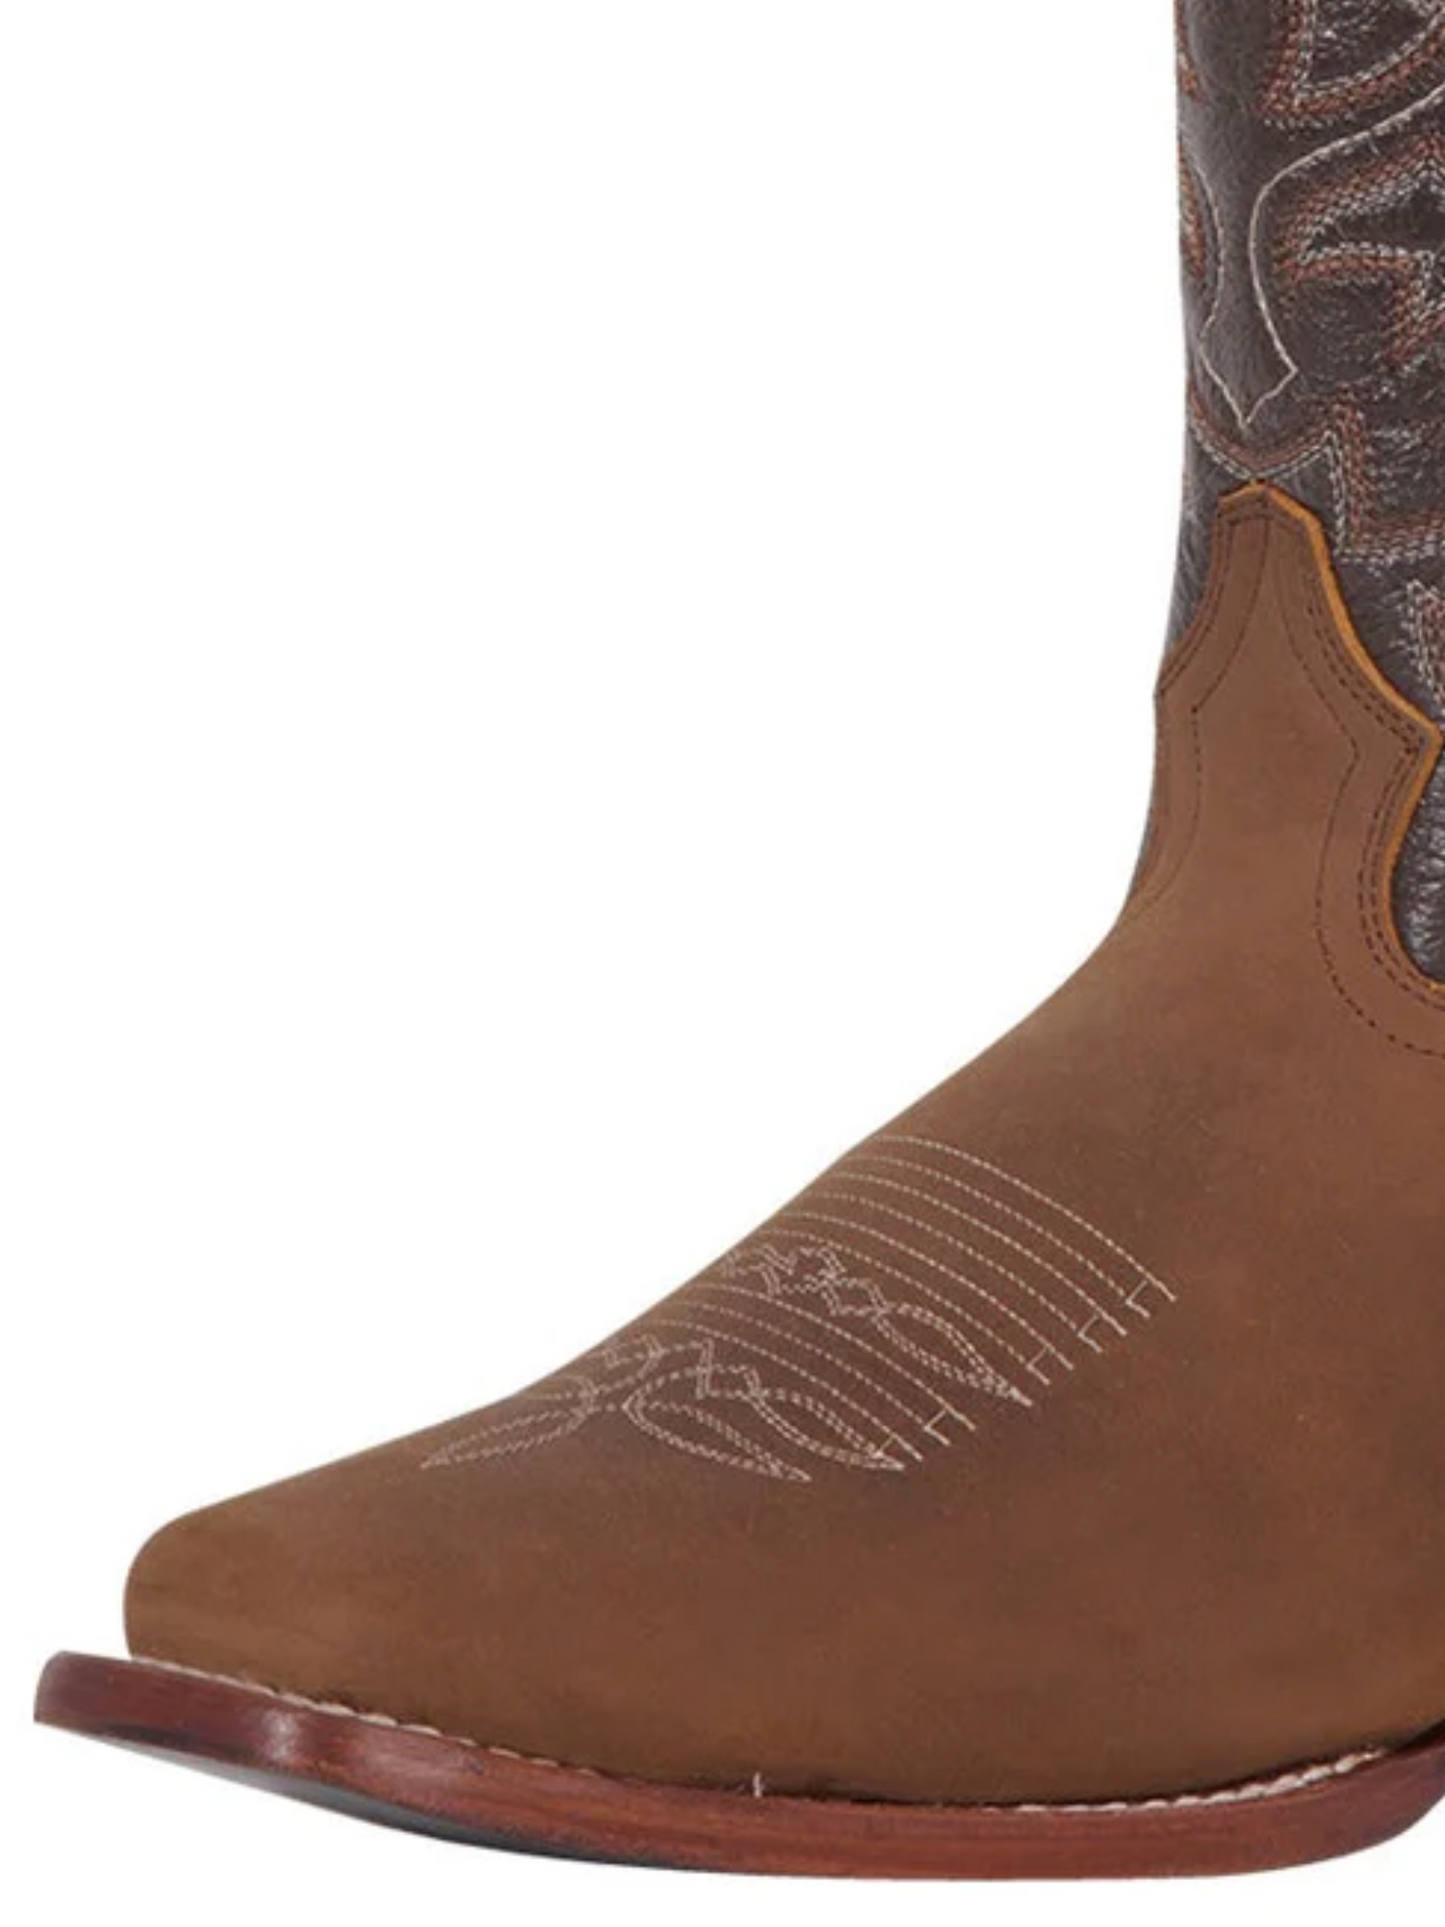 Classic Genuine Leather Rodeo Cowboy Boots for Men 'El General' - ID: 43007